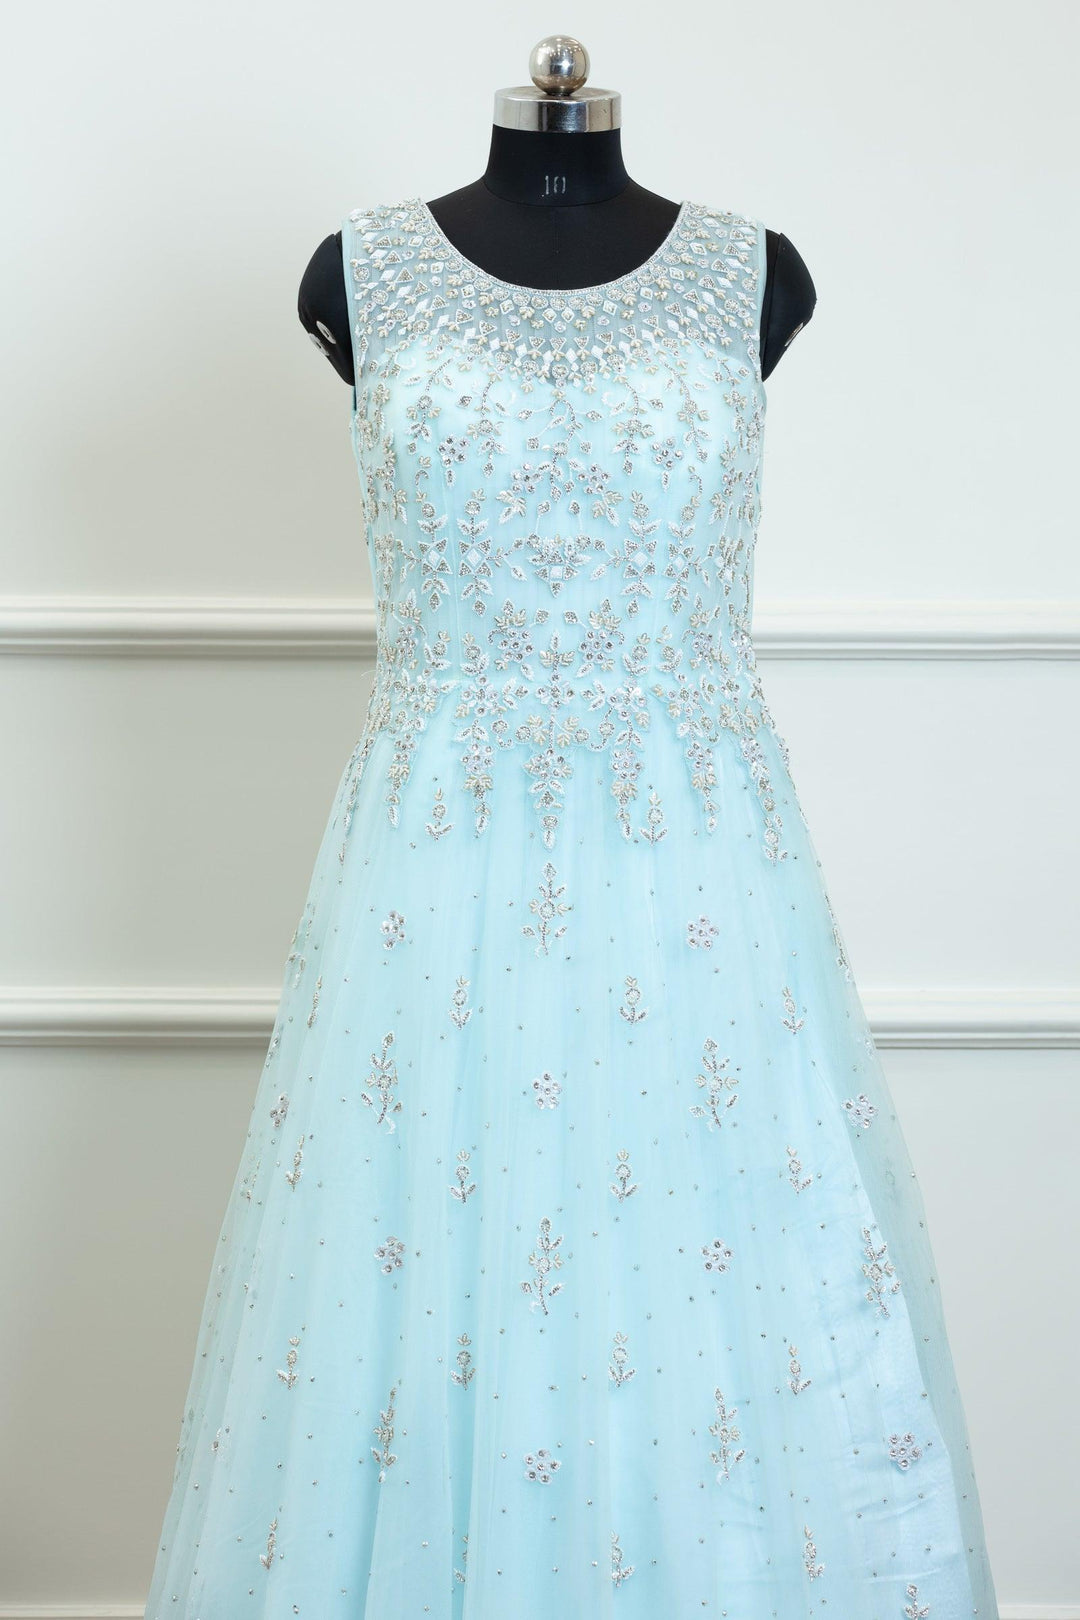 Sky Blue Beads, Pearl, Sequins and Stone work Bridal and Partywear Gown - Seasons Chennai